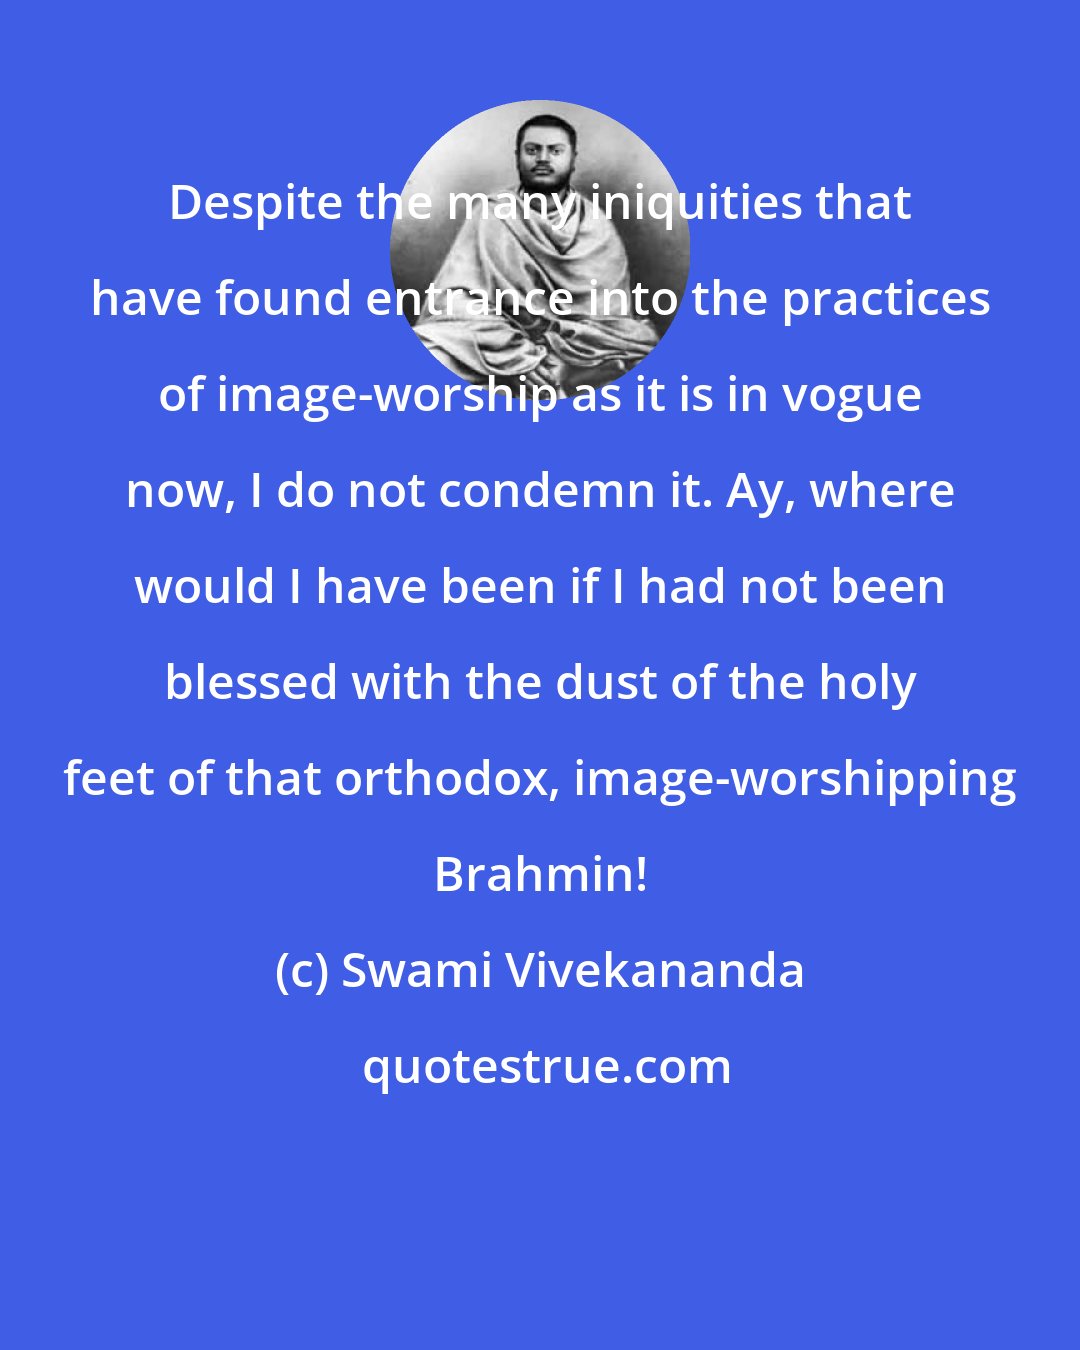 Swami Vivekananda: Despite the many iniquities that have found entrance into the practices of image-worship as it is in vogue now, I do not condemn it. Ay, where would I have been if I had not been blessed with the dust of the holy feet of that orthodox, image-worshipping Brahmin!